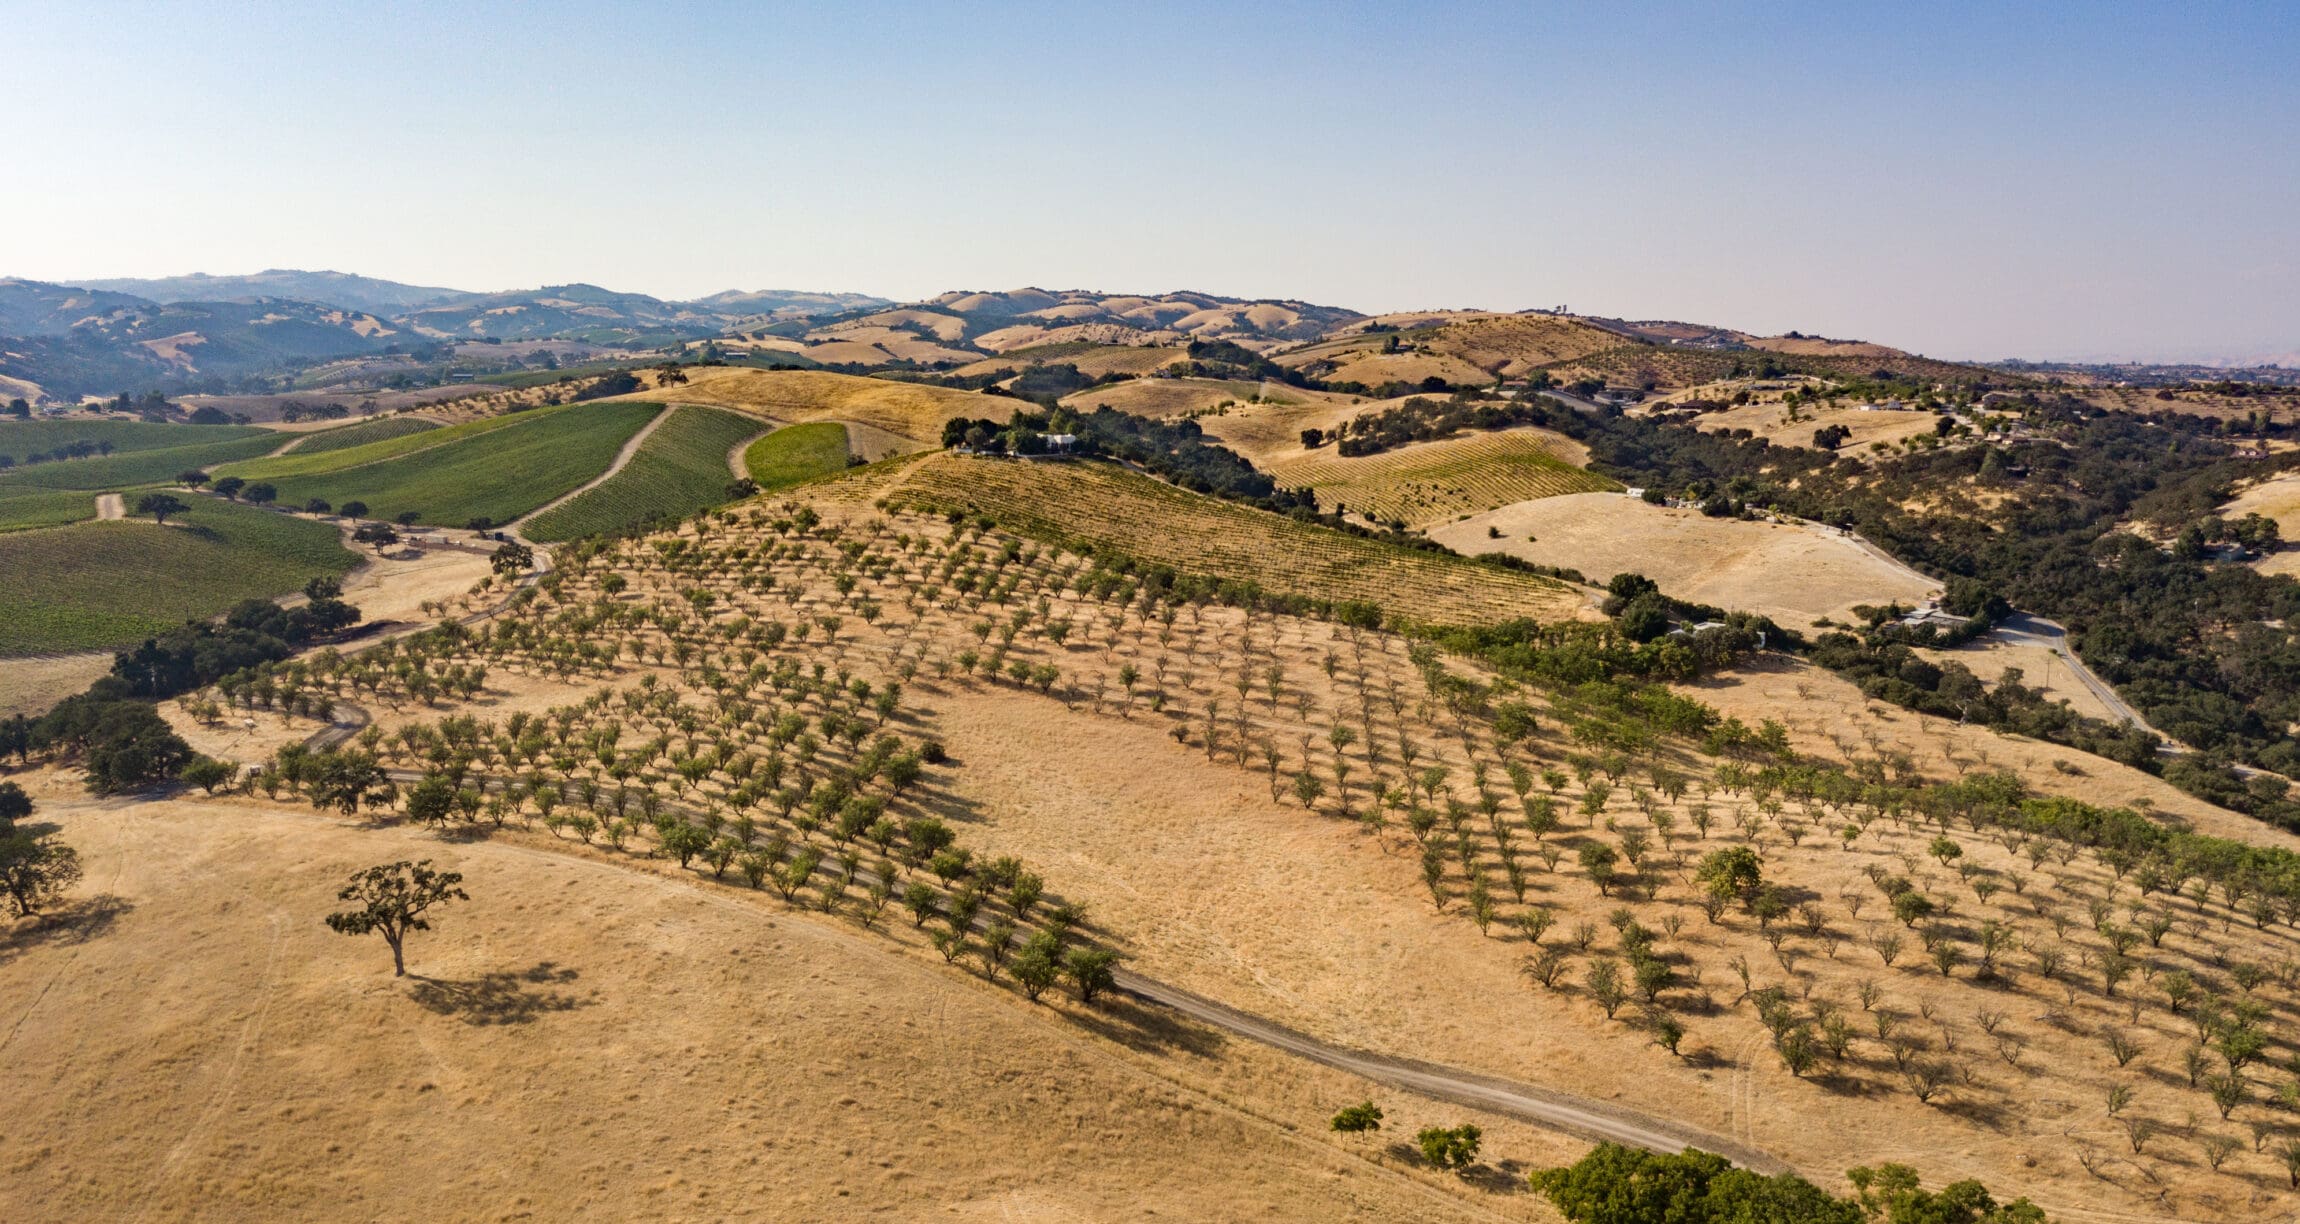 A guide to Paso Robles | sweeping views over a winery estate